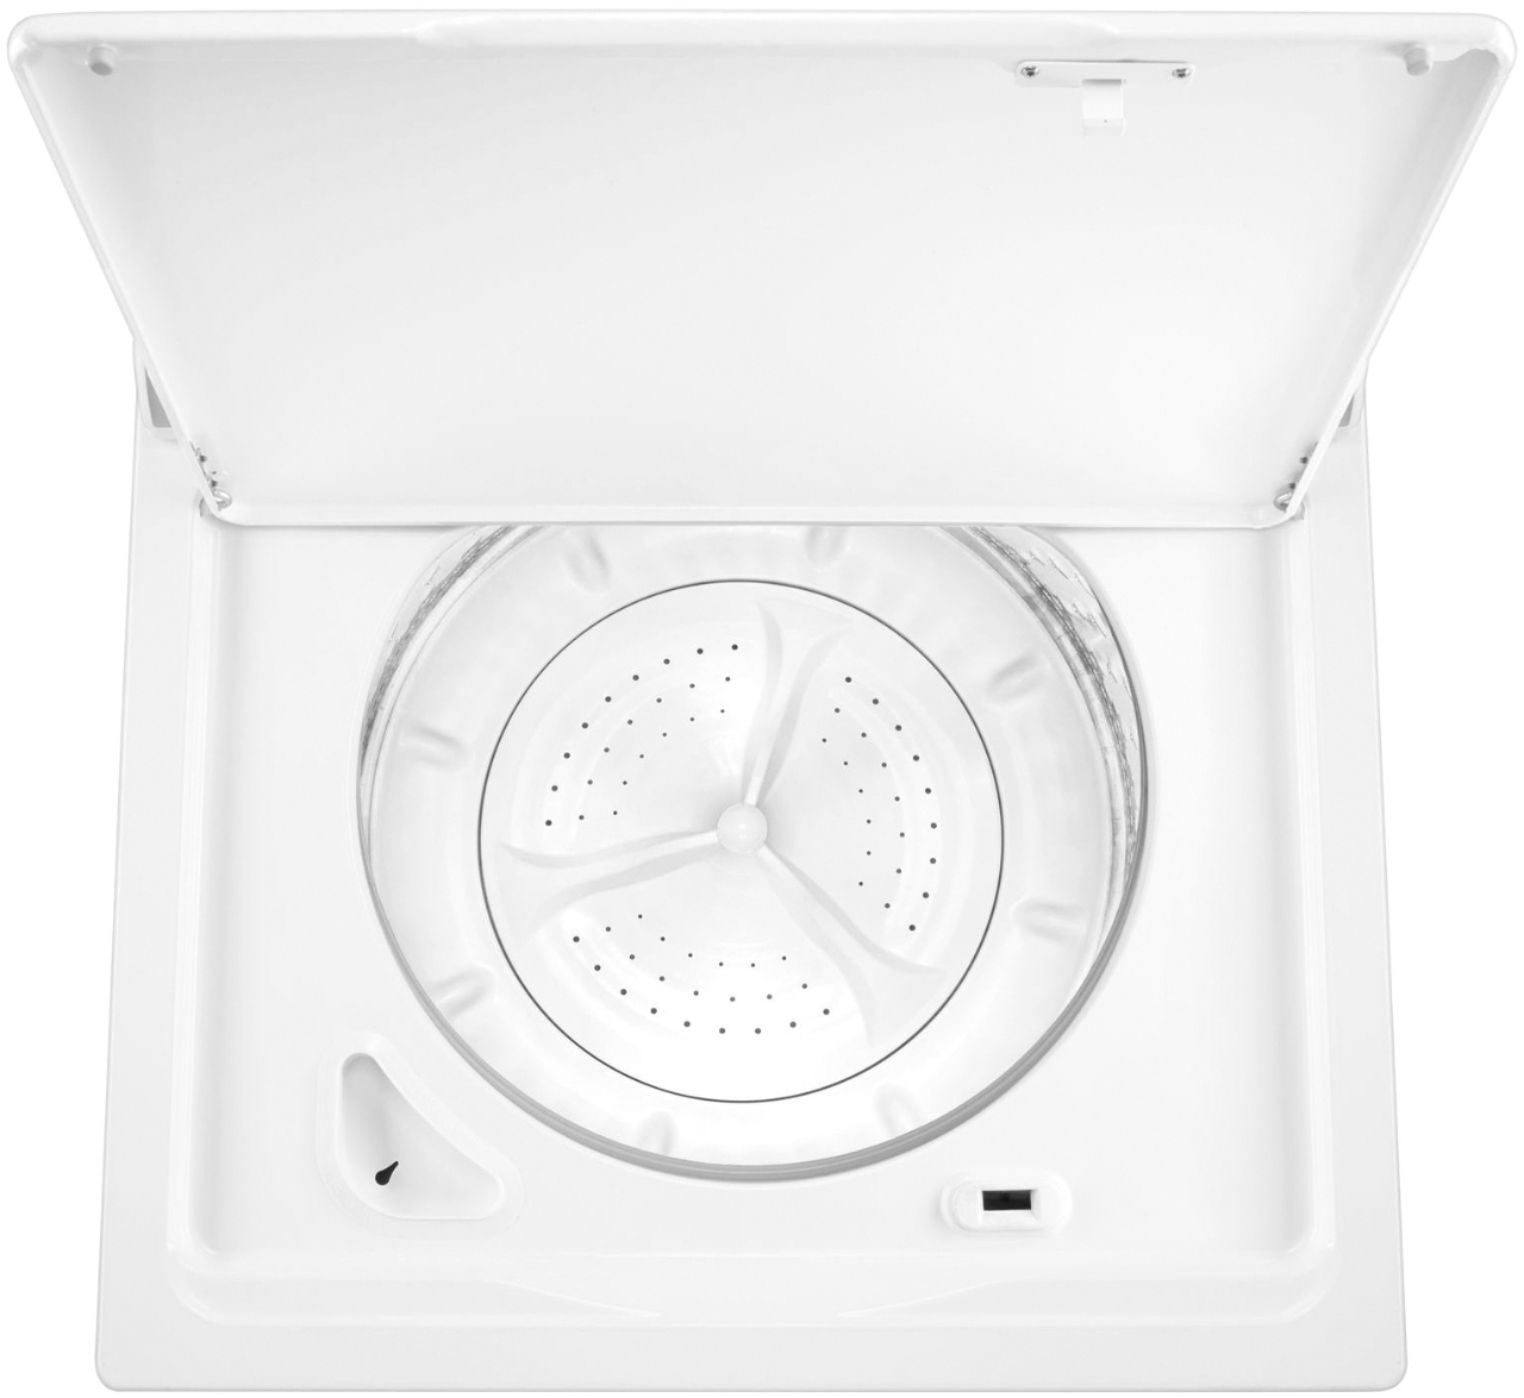 Whirlpool WTW5000DW Washing Machine Review - Consumer Reports